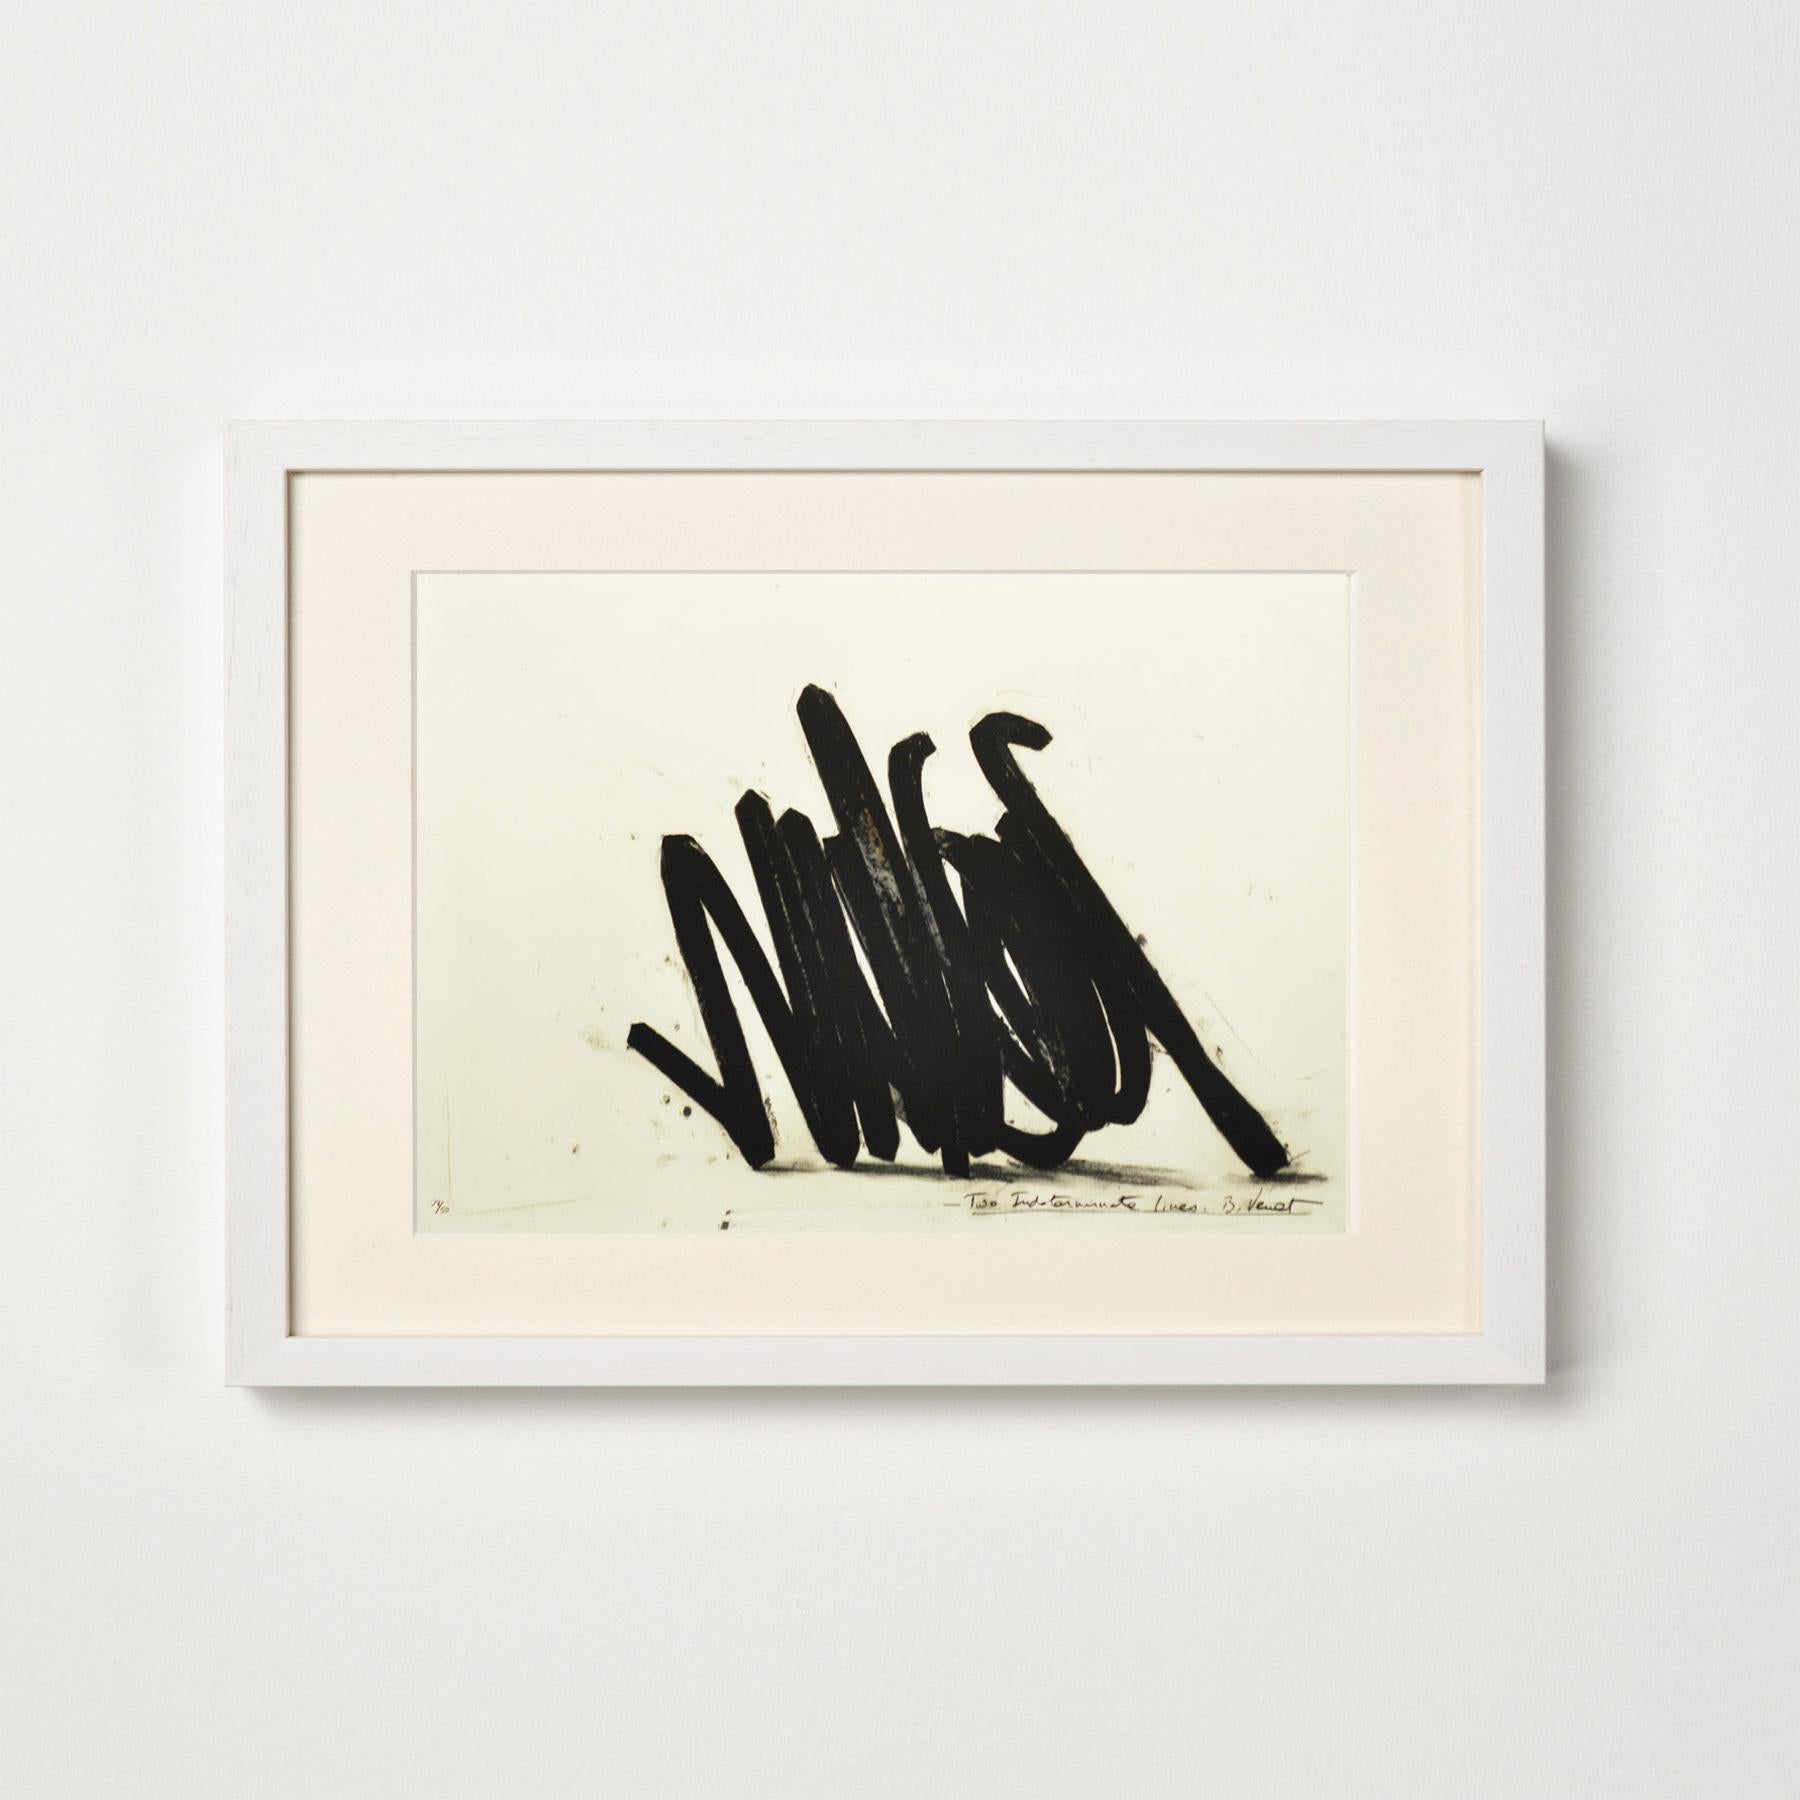 Two Indeterminate Lines - Contemporary, 21st Century, Etching, Black, Edition - Print by Bernar Venet